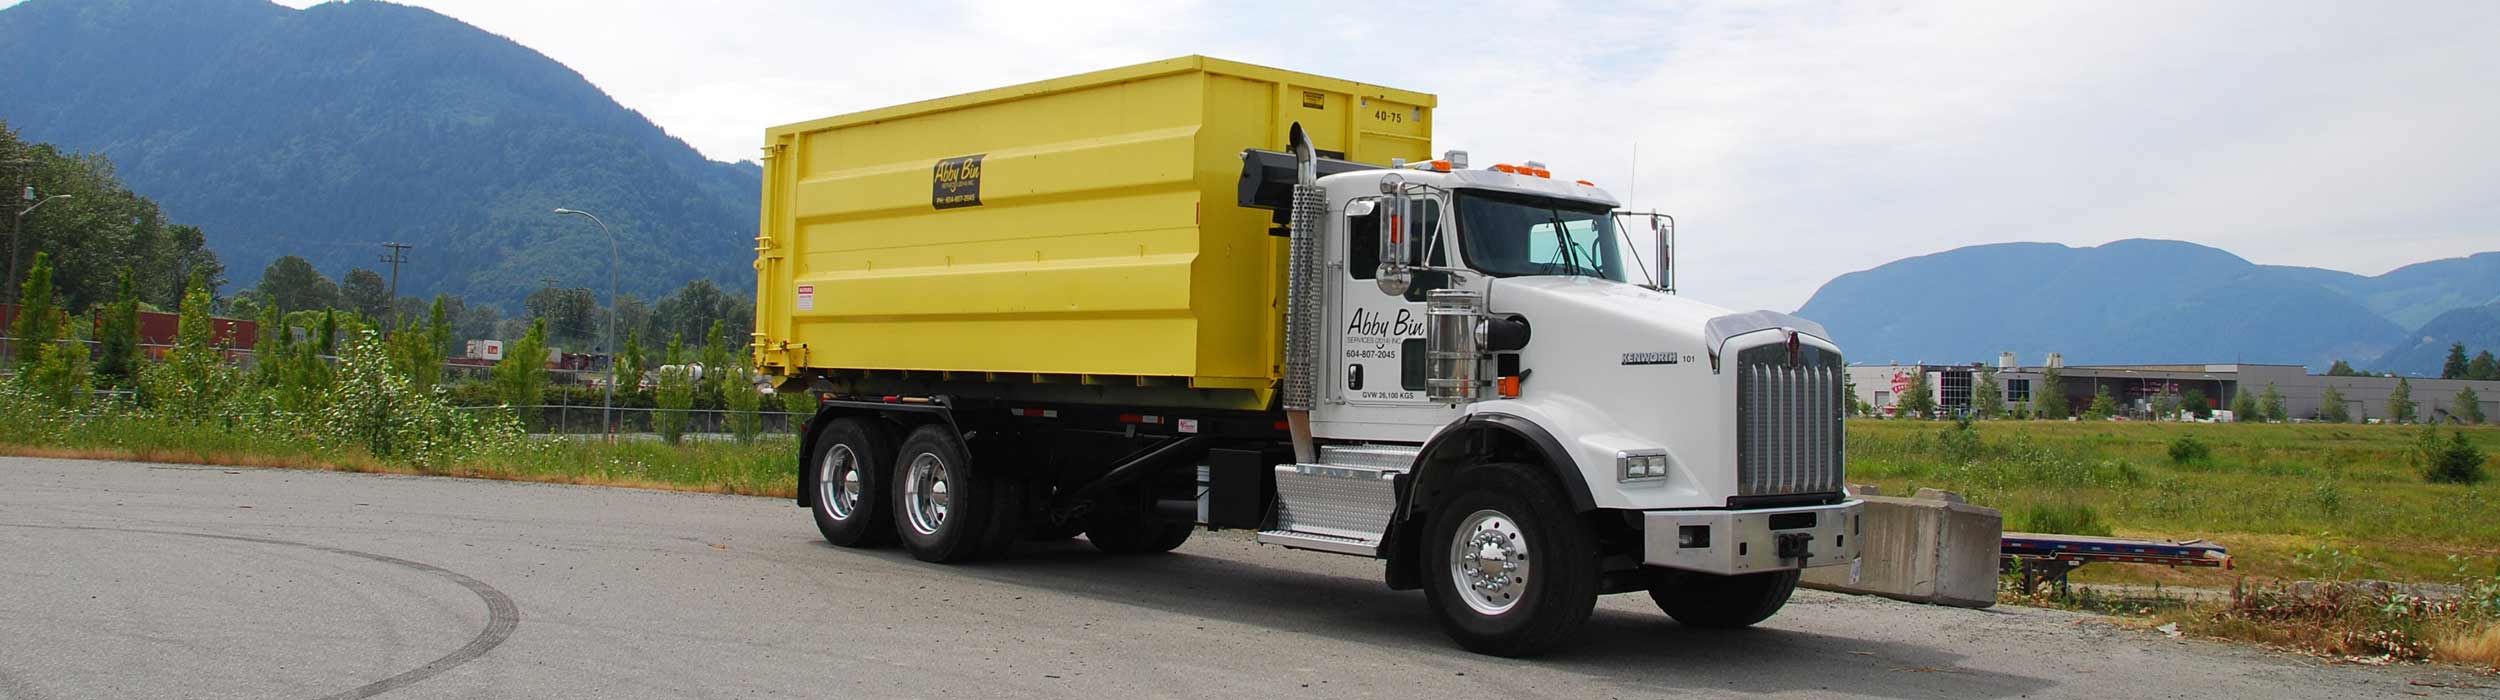 Abby Bin Truck with roll-off container